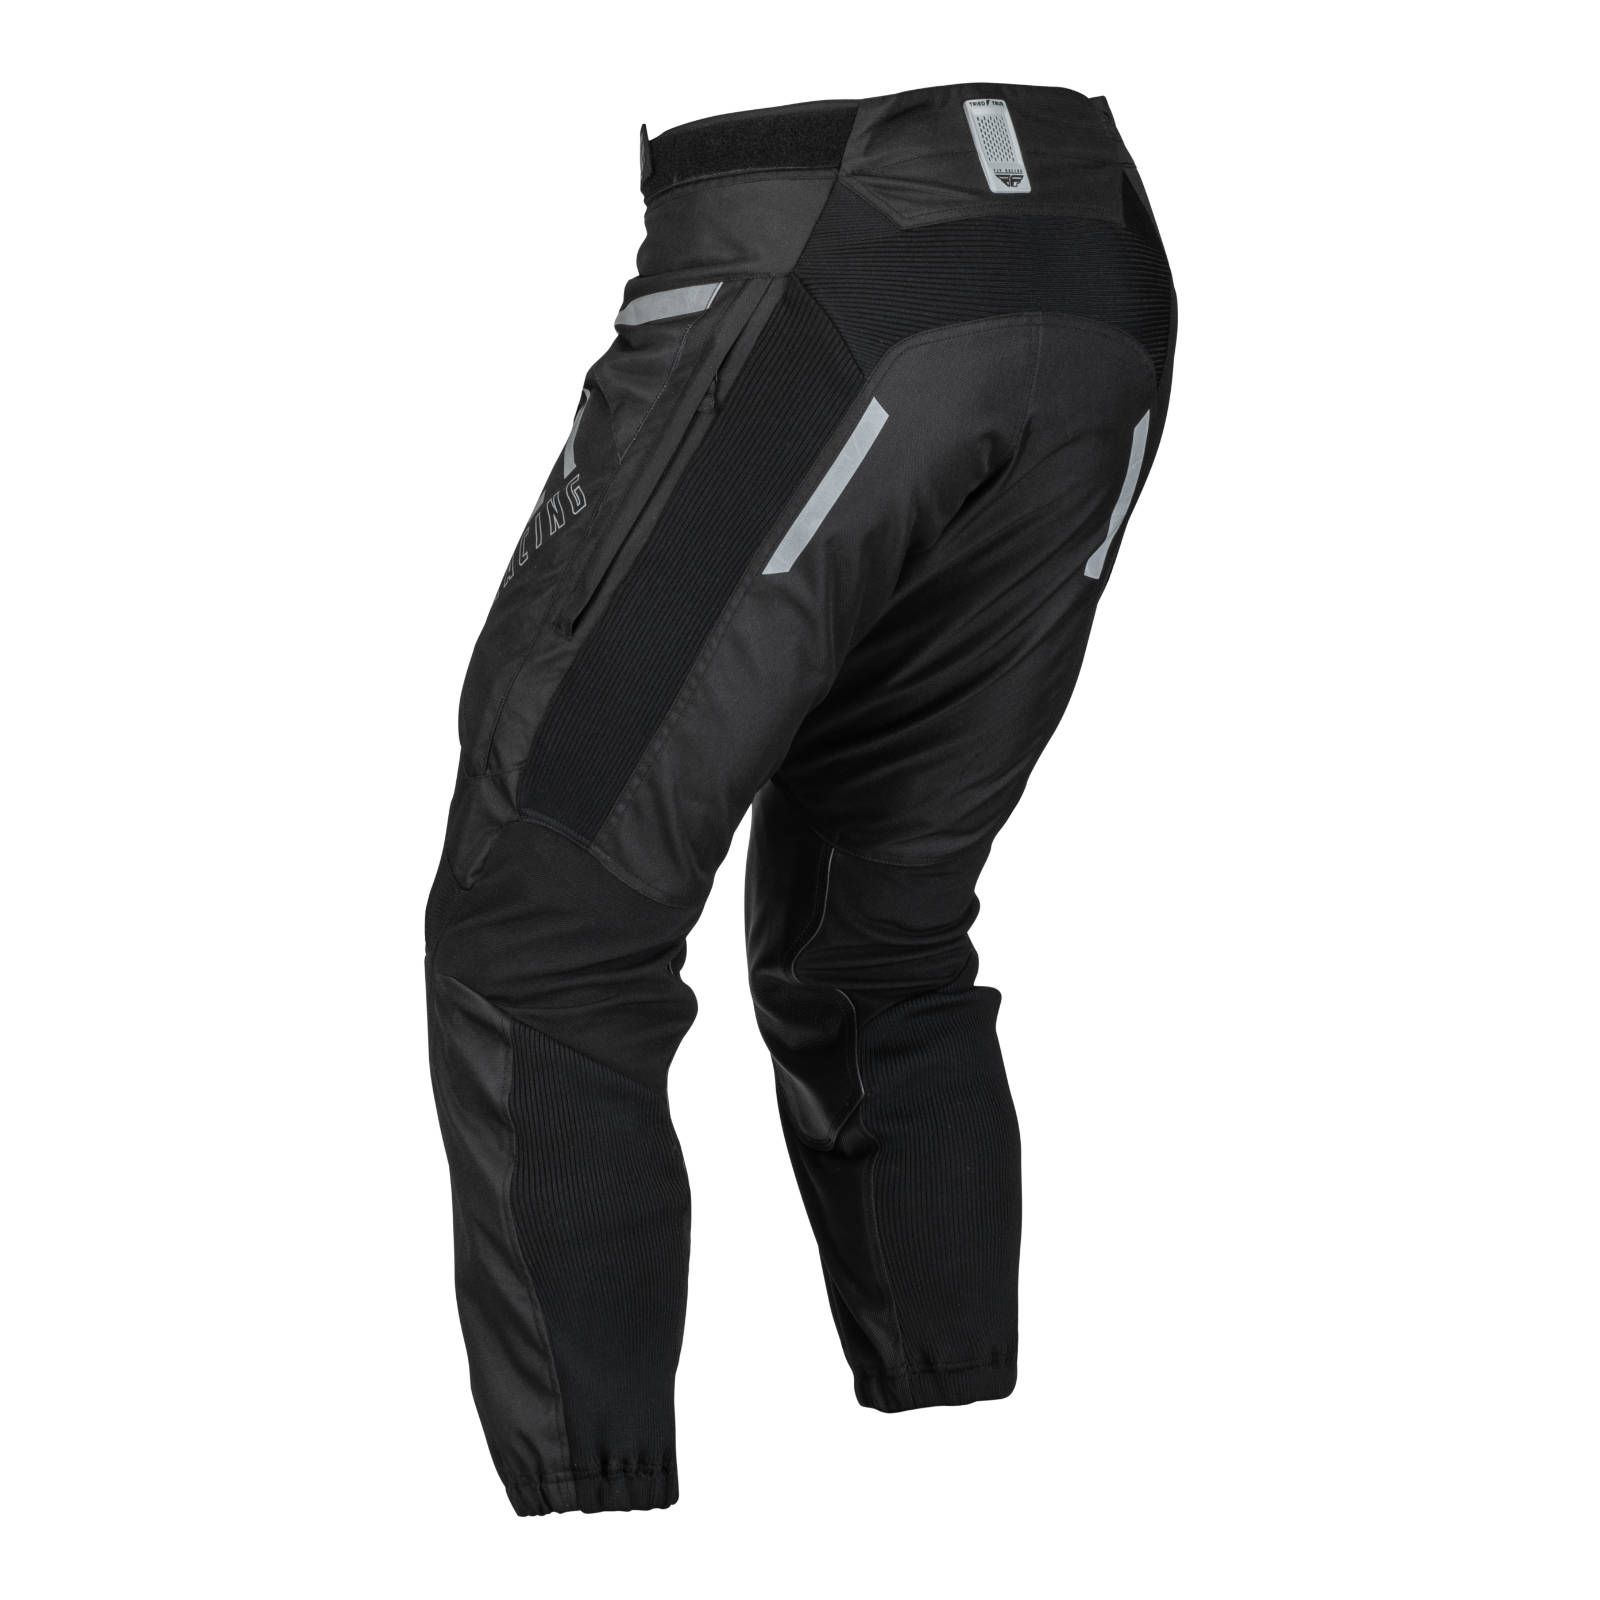 Fly '23 Patrol Pants Black/White | Tracktion Motorcycles